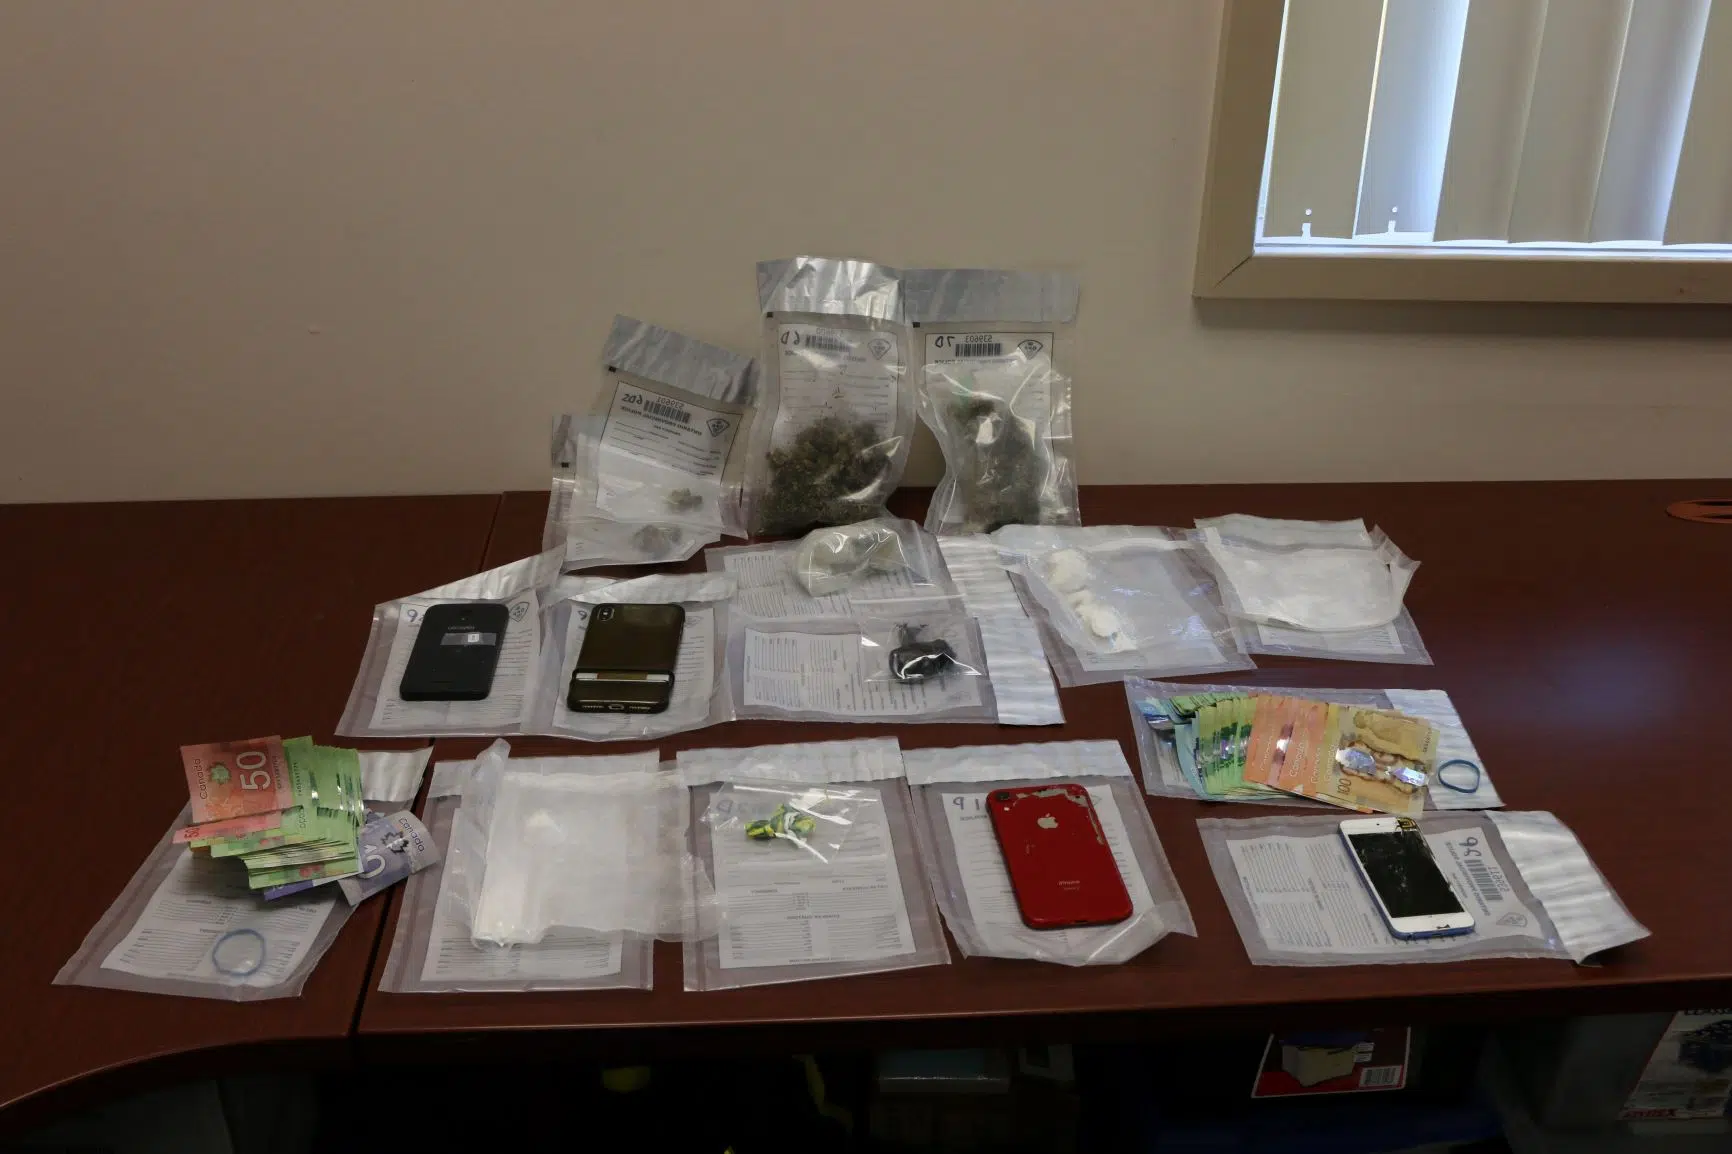 Traffic stop results in drug and weapons charges